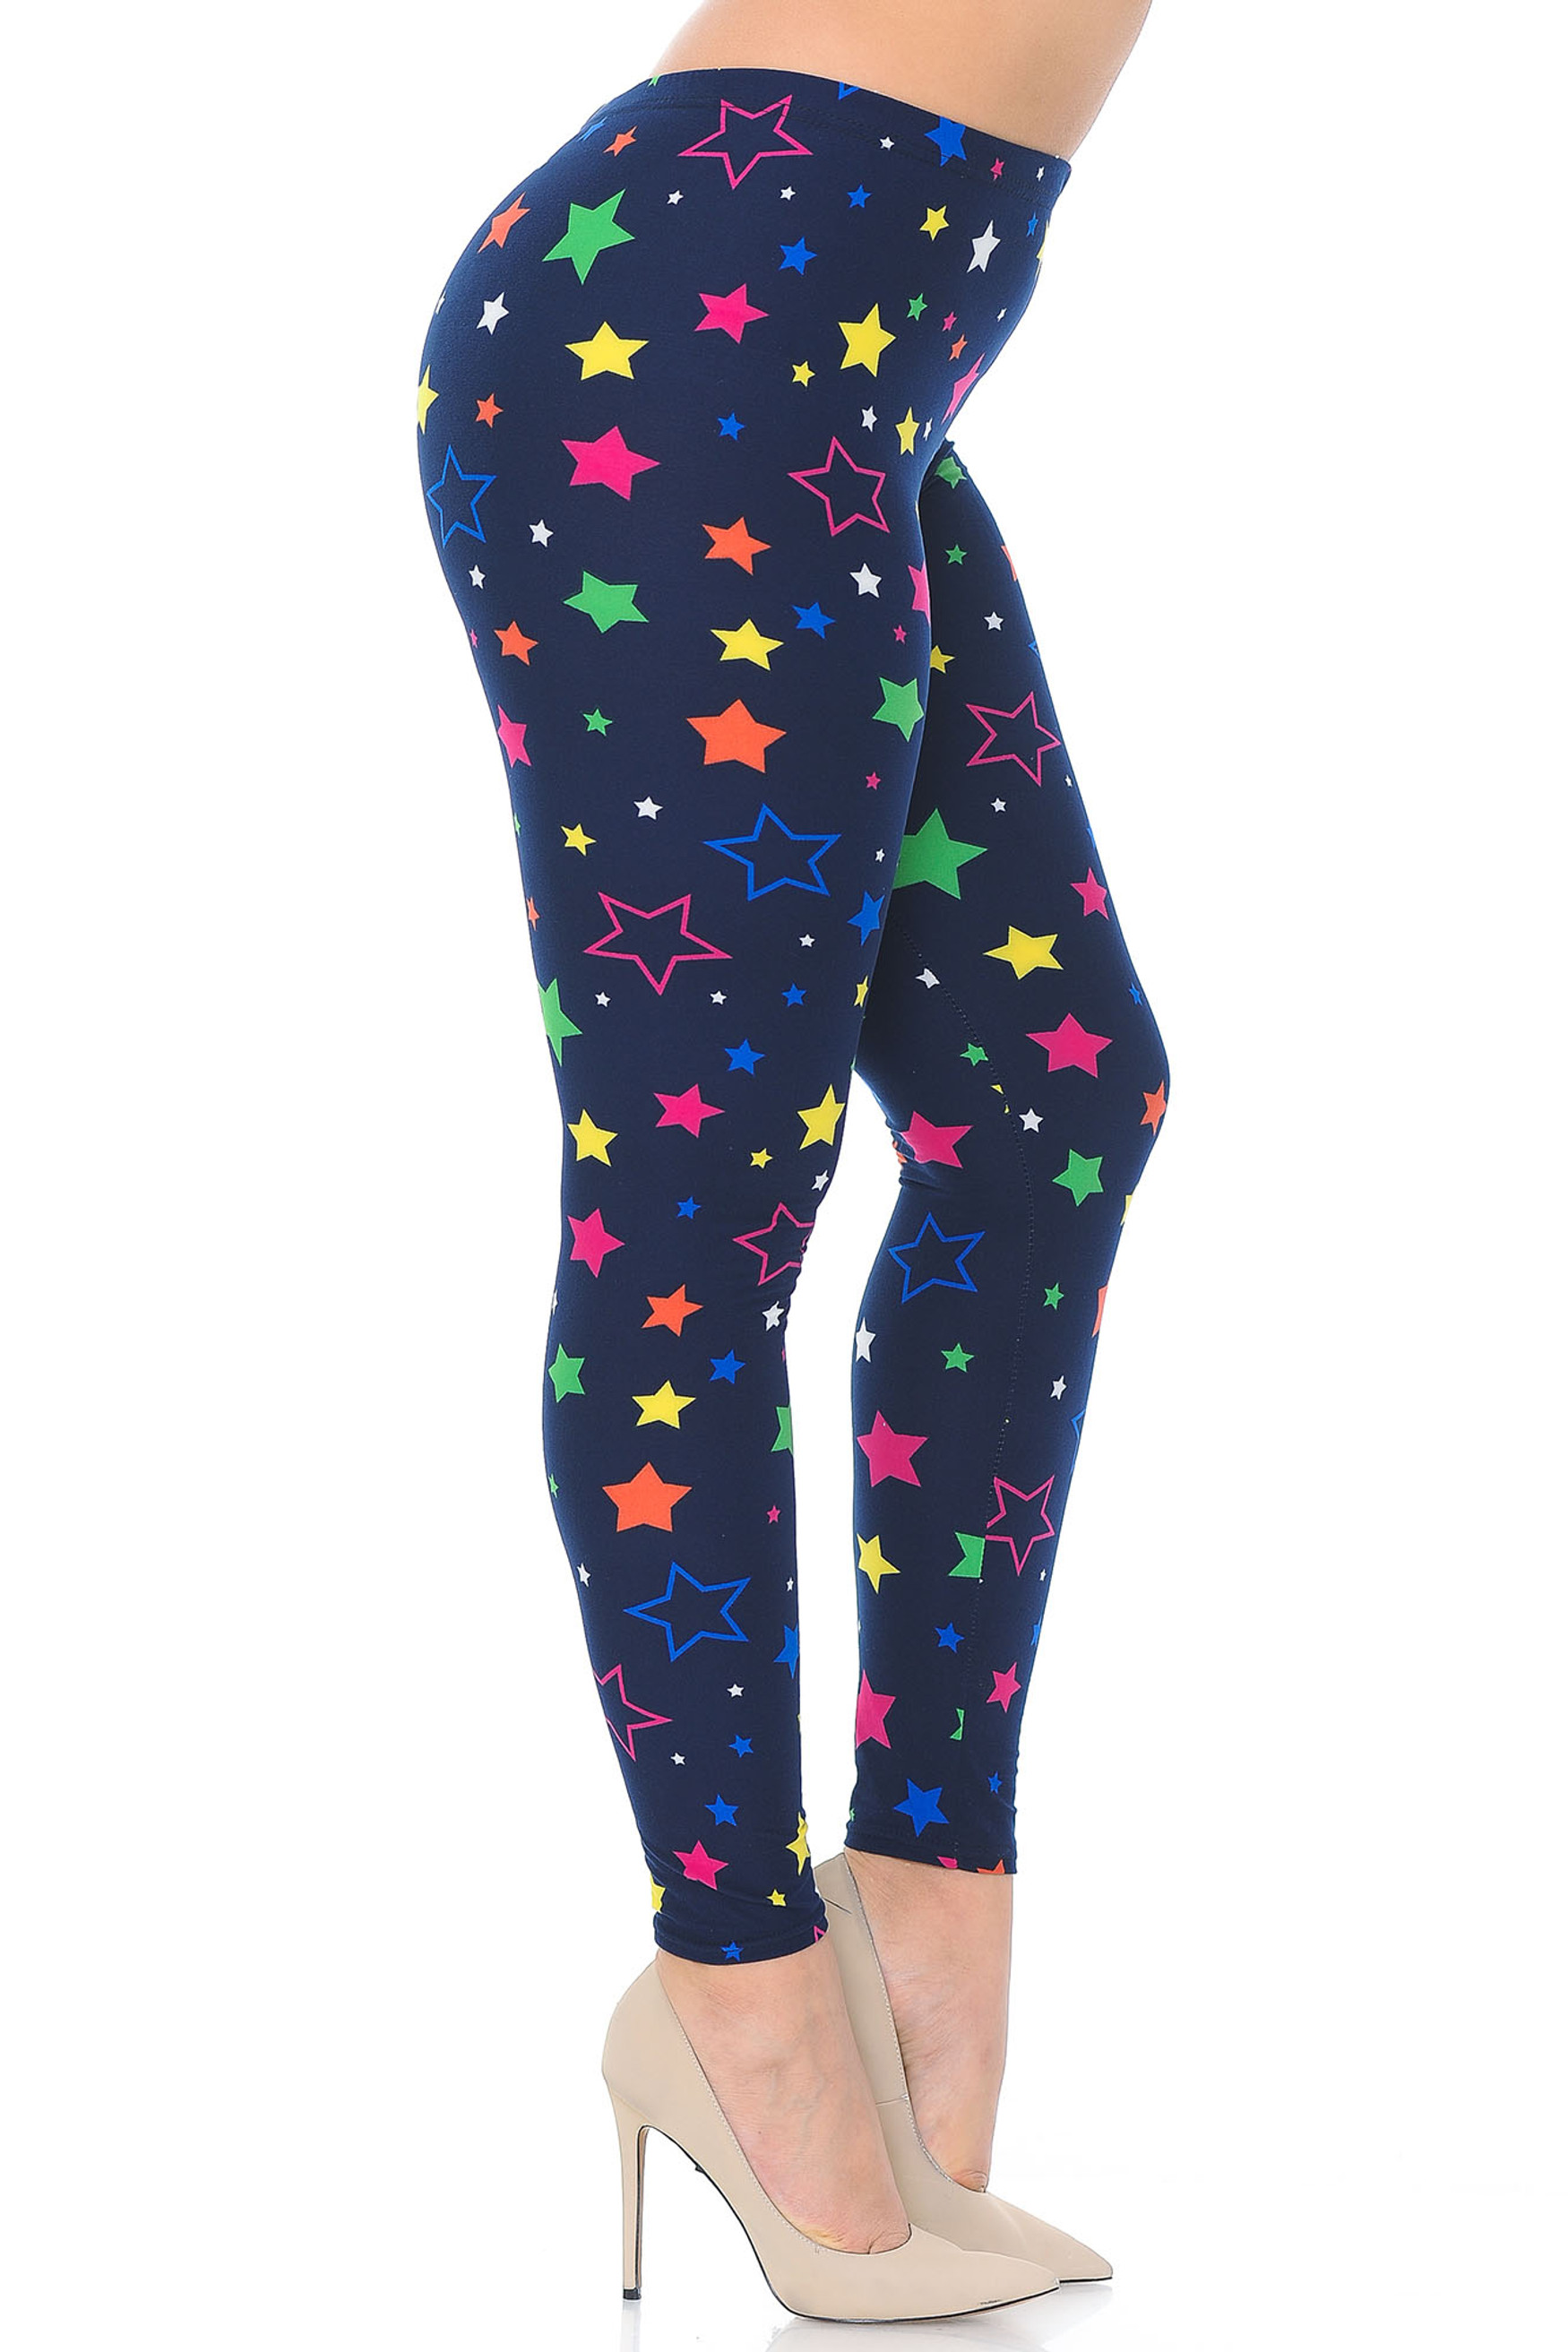 Buttery Soft Colorful Stars Plus Size Leggings